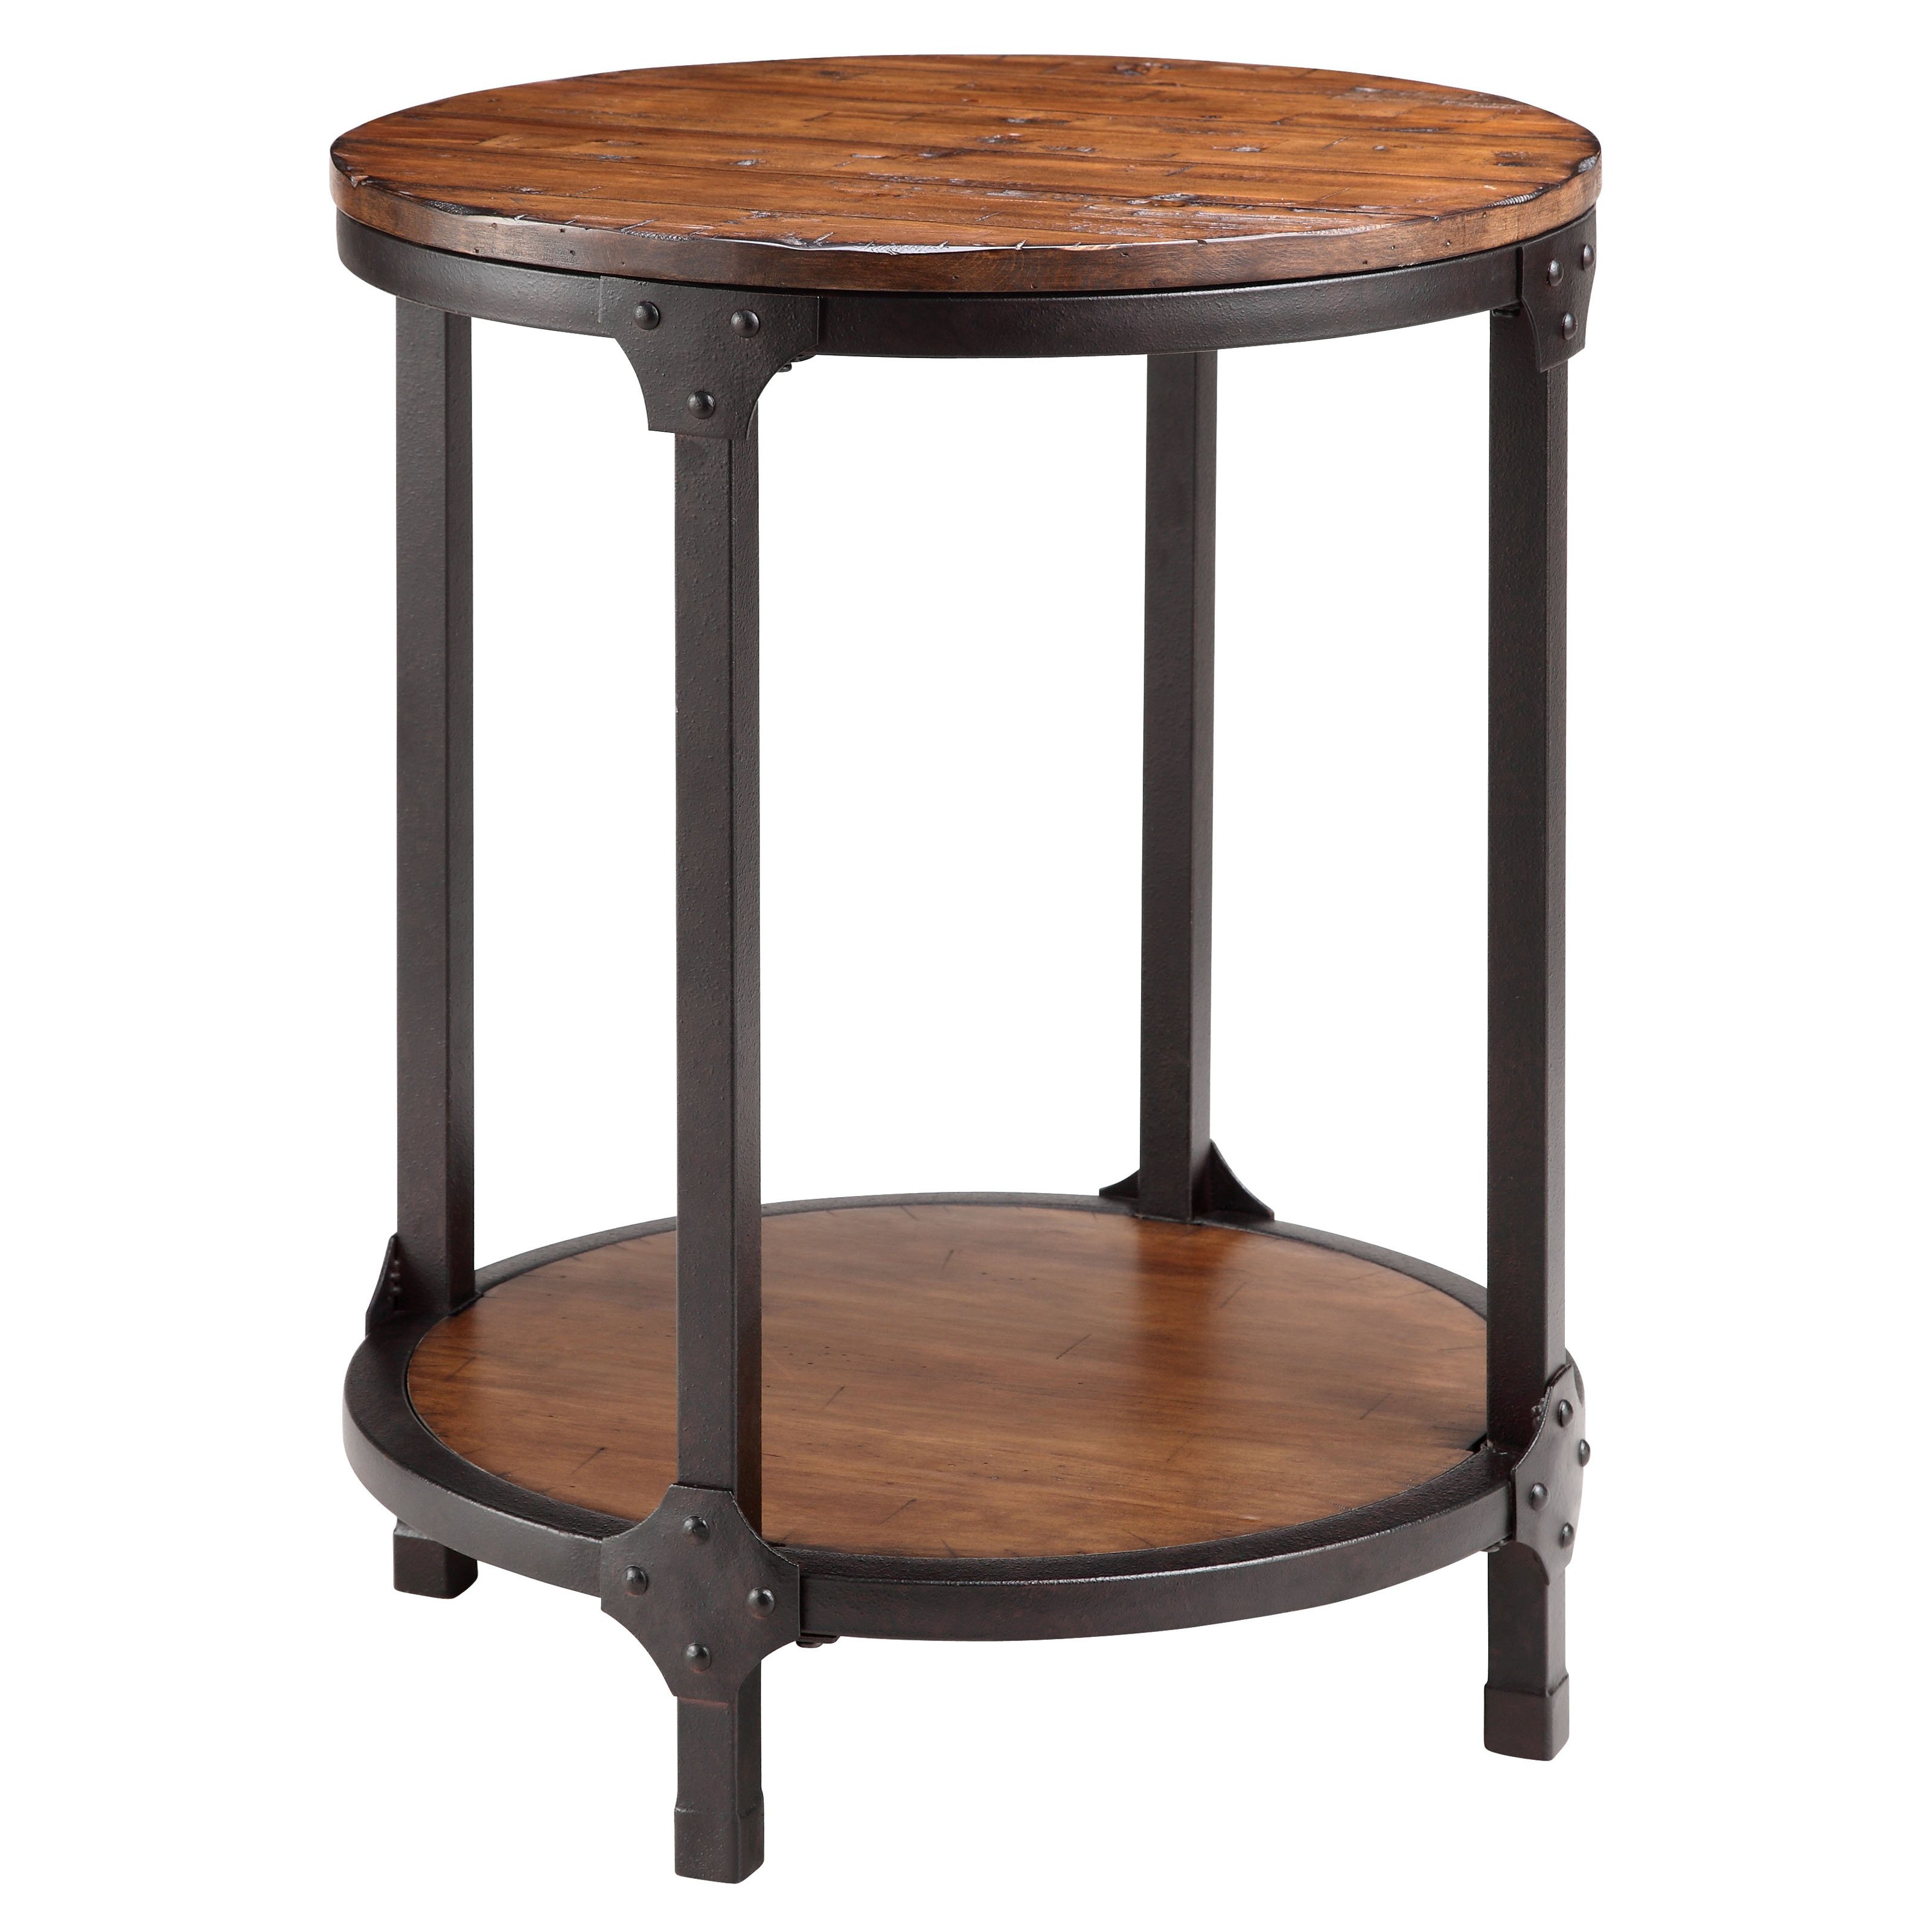 tea table design the terrific fun black metal and wood end tables tall round brown wooden side with frames shelf also four legs live laptop cooling fan value city beds chairs